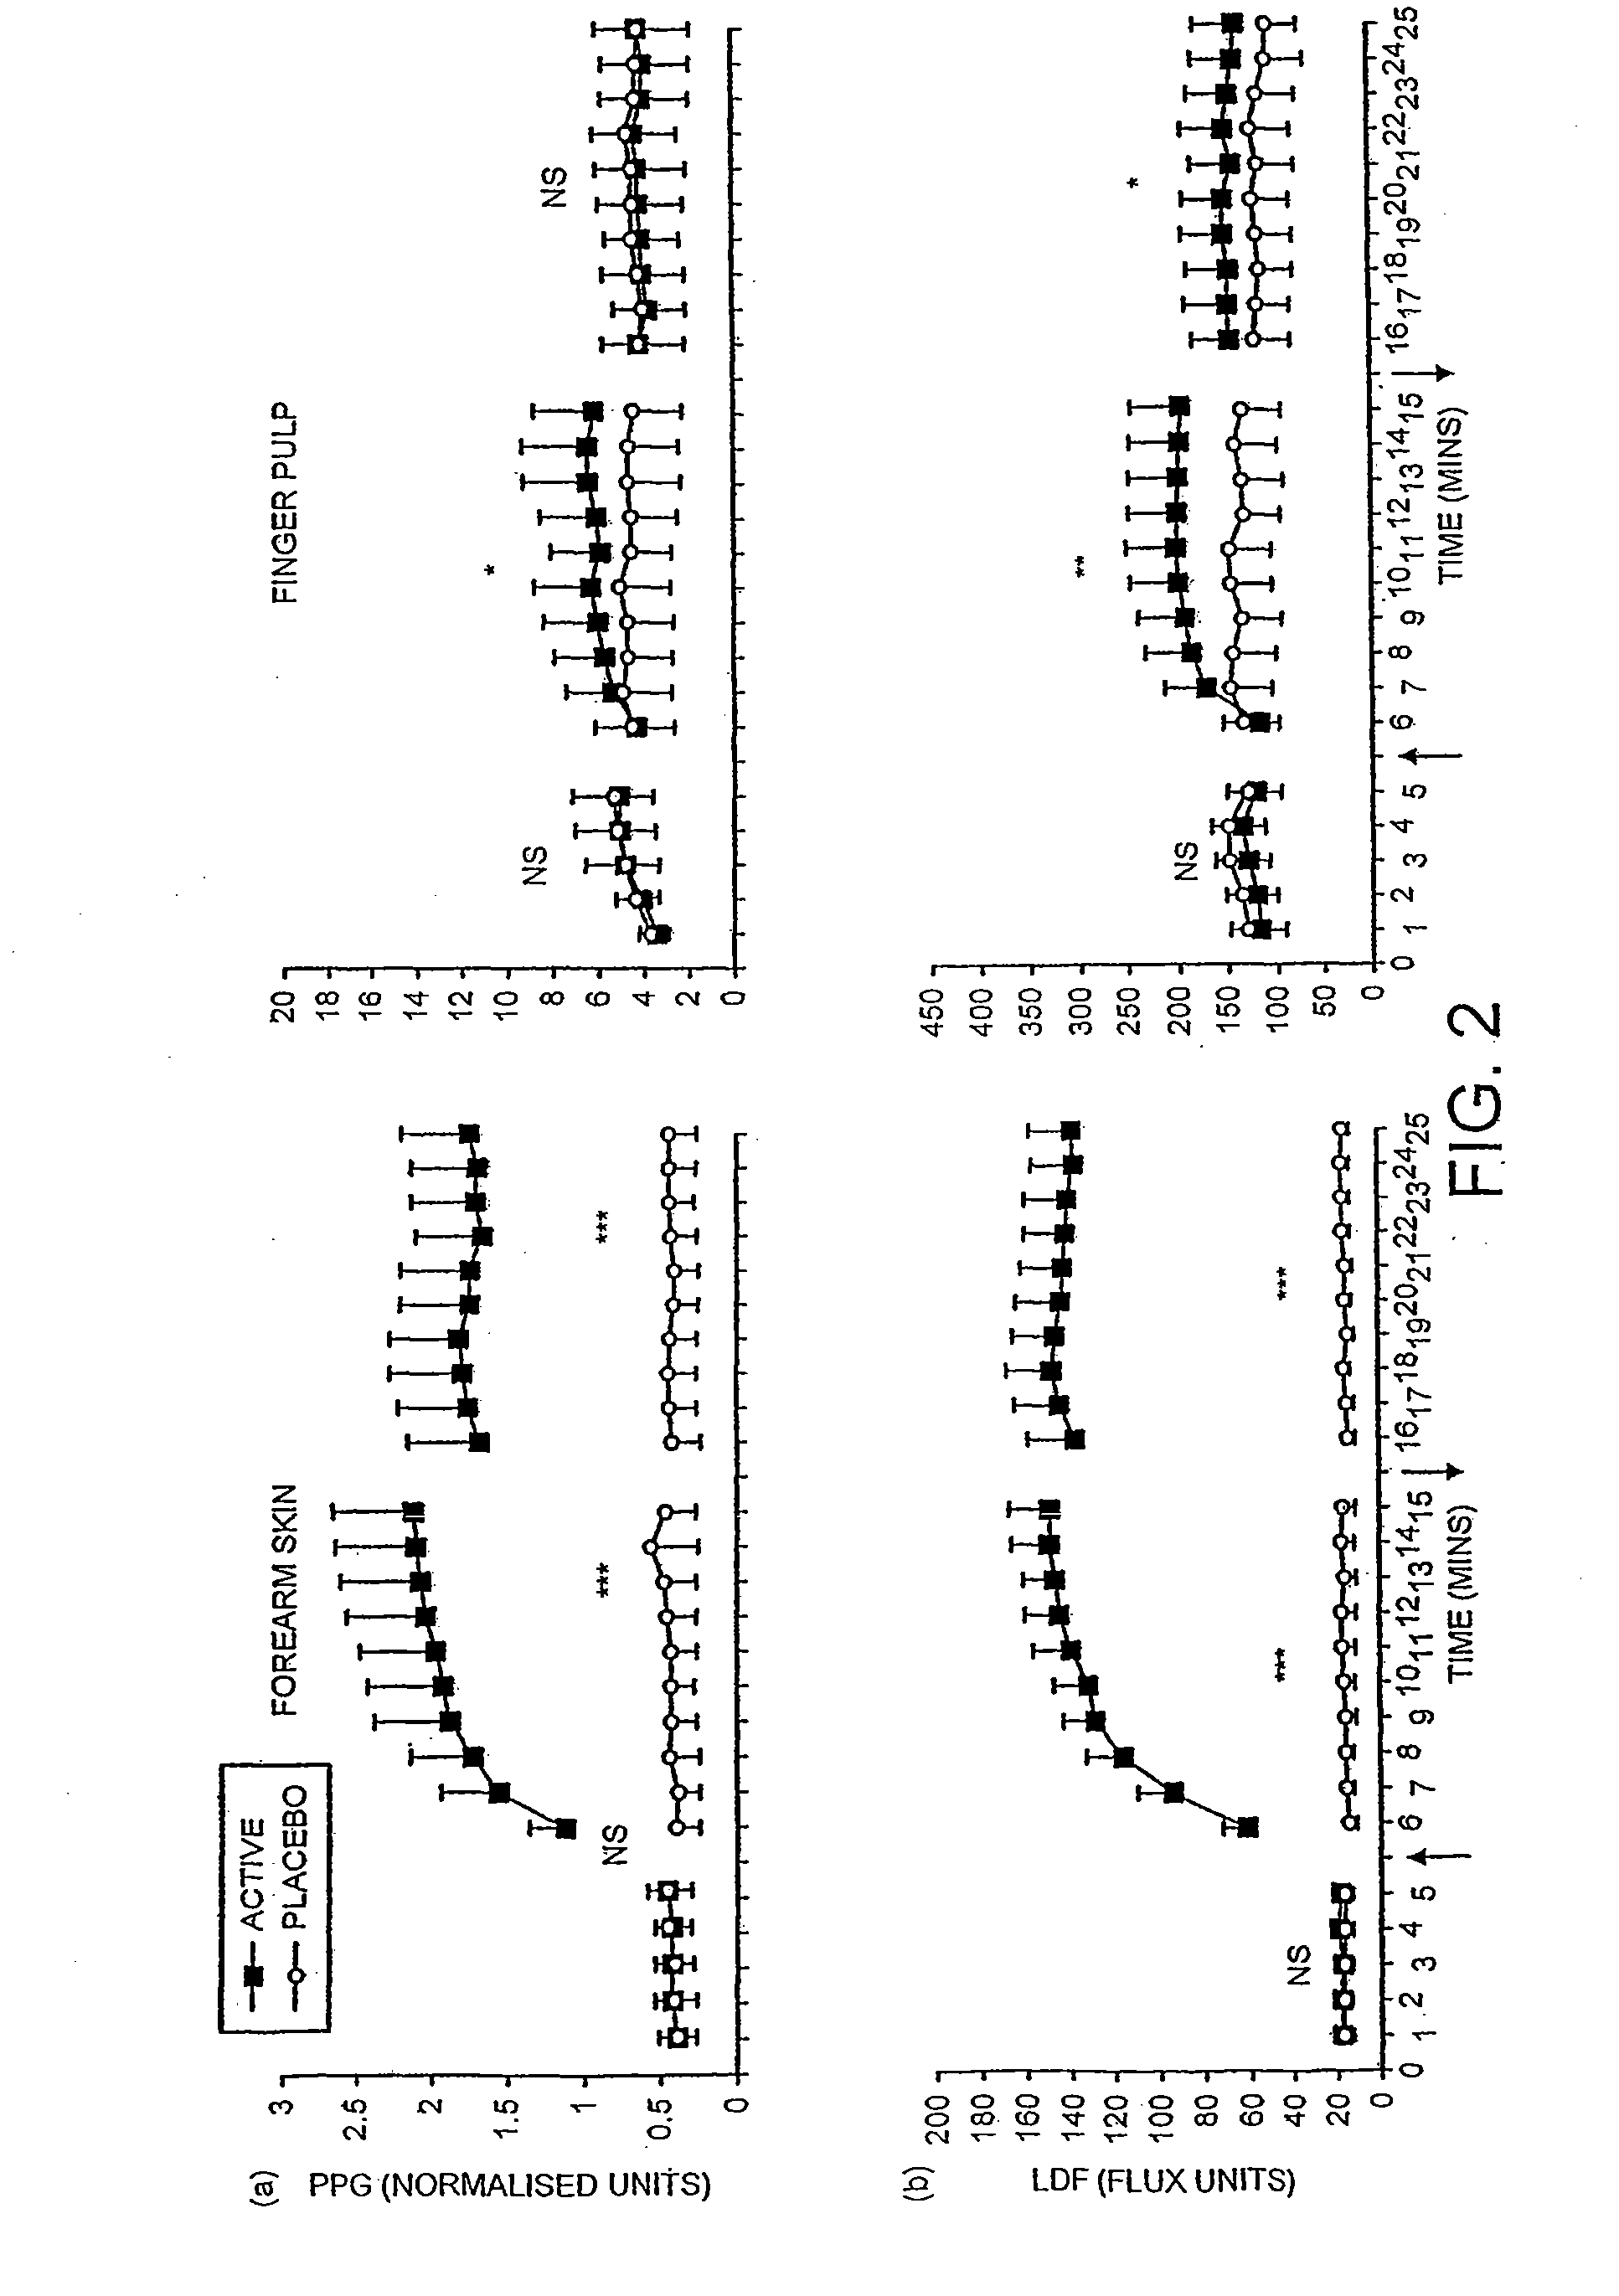 Transdermal pharmaceutical delivery compositions